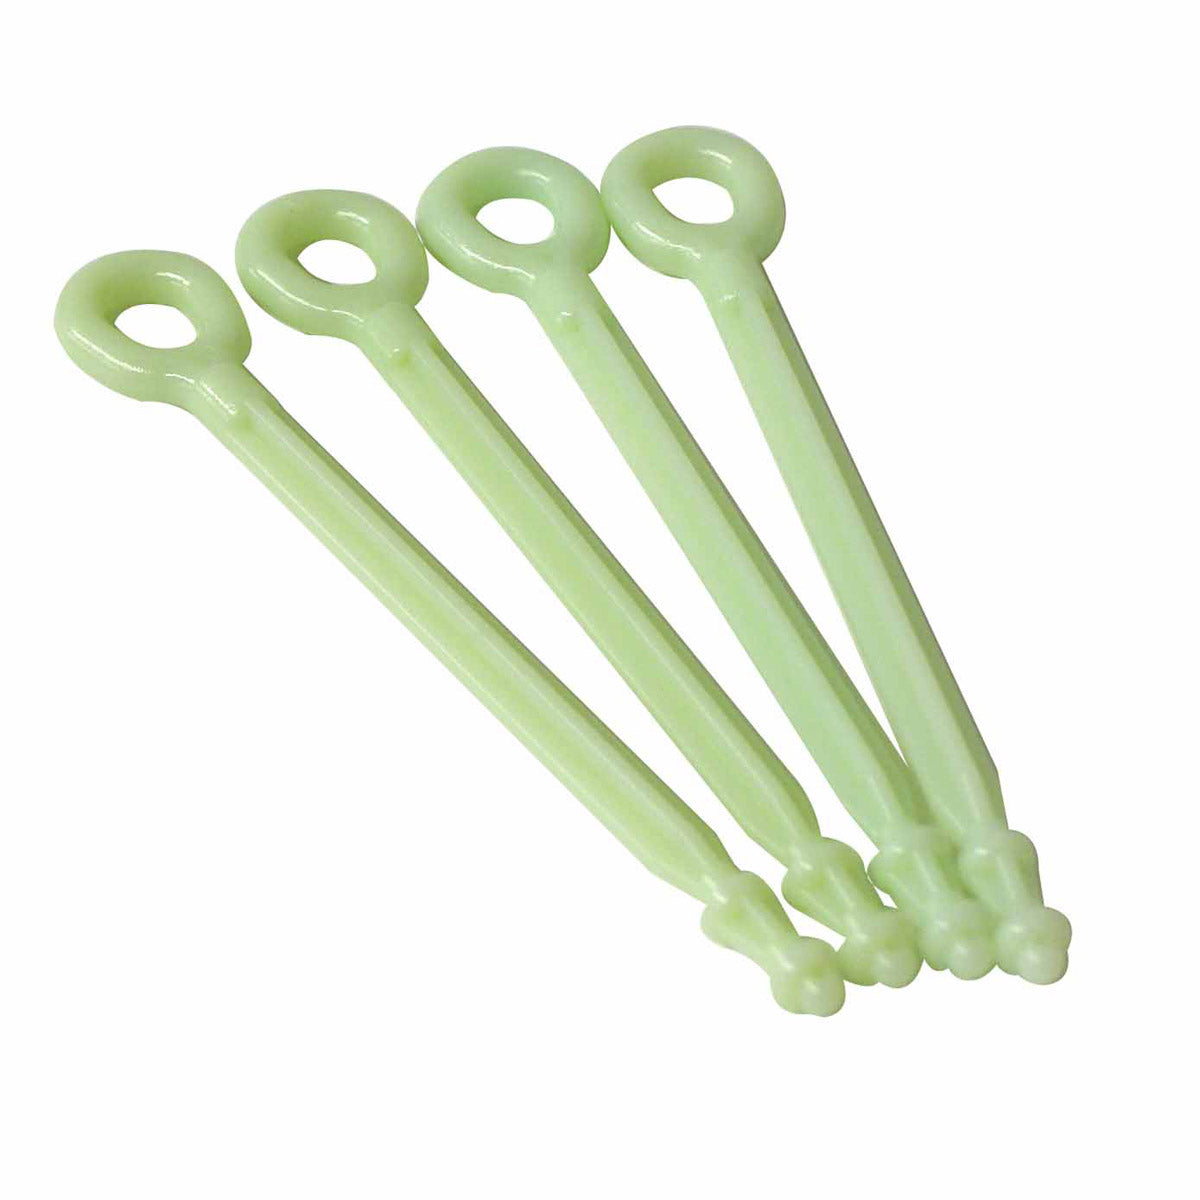 Greenlee 06259 CableCaster Replacement Darts (Pack of 4)